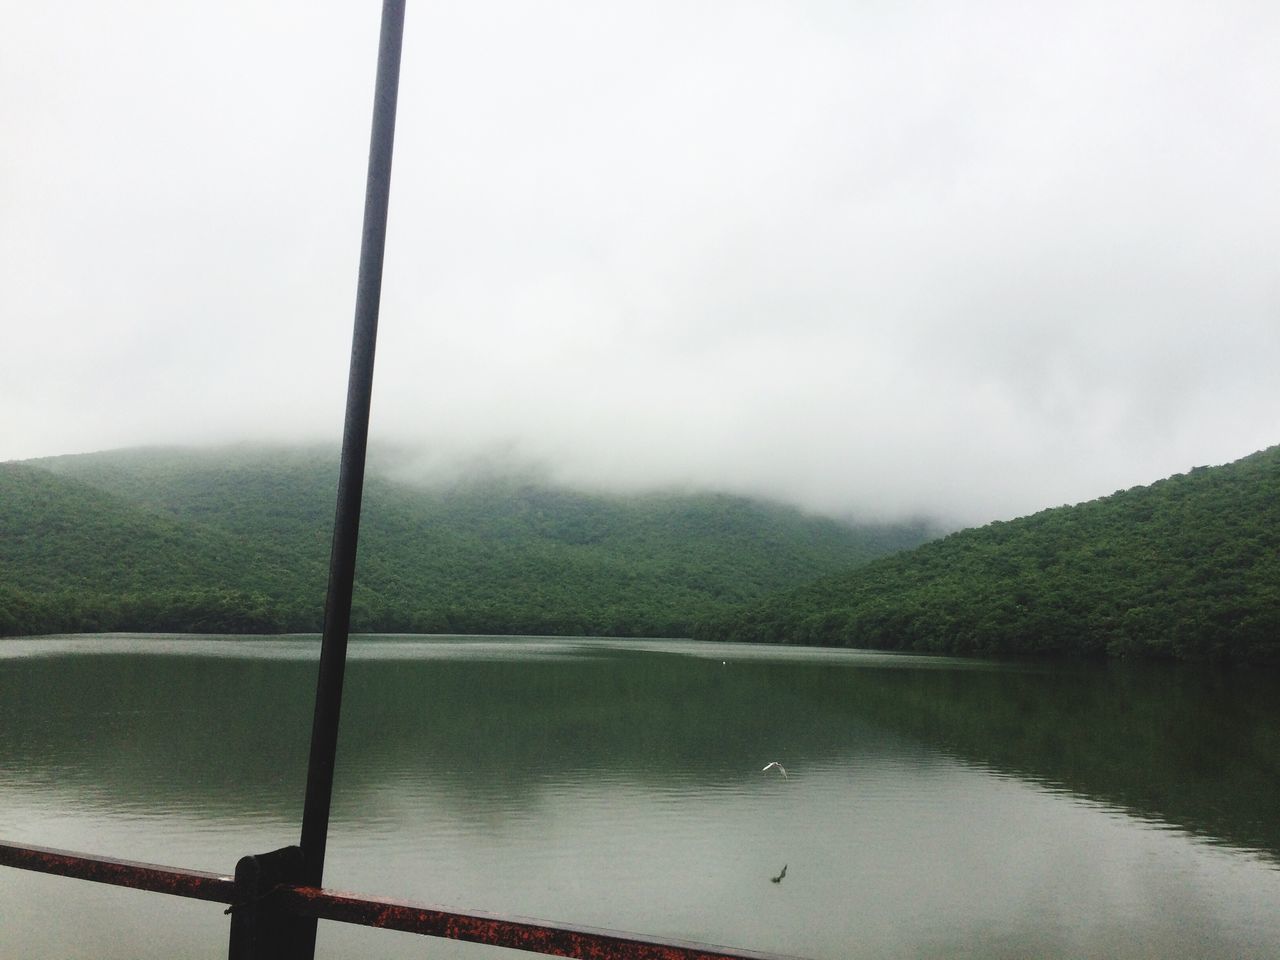 tranquil scene, lake, water, mountain, scenics, tranquility, beauty in nature, non-urban scene, fog, nature, sky, foggy, calm, countryside, vacations, day, tourism, waterfront, cloud - sky, remote, no people, journey